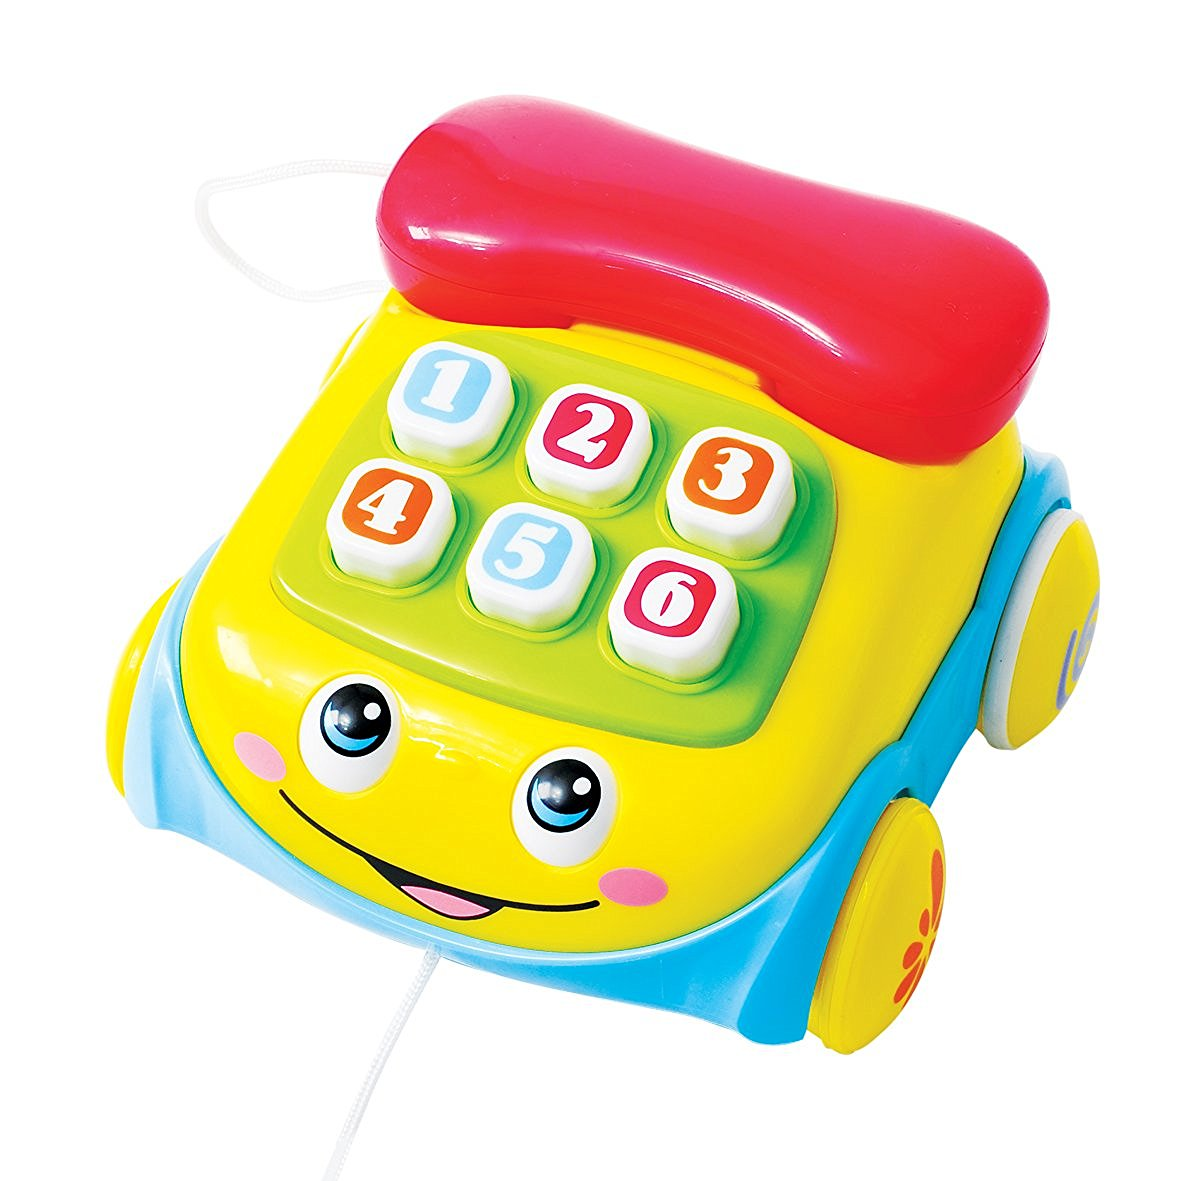 PlayGo Tommy The Telephone Baby Toy Only $5.68 on Amazon! (Add-On Item)